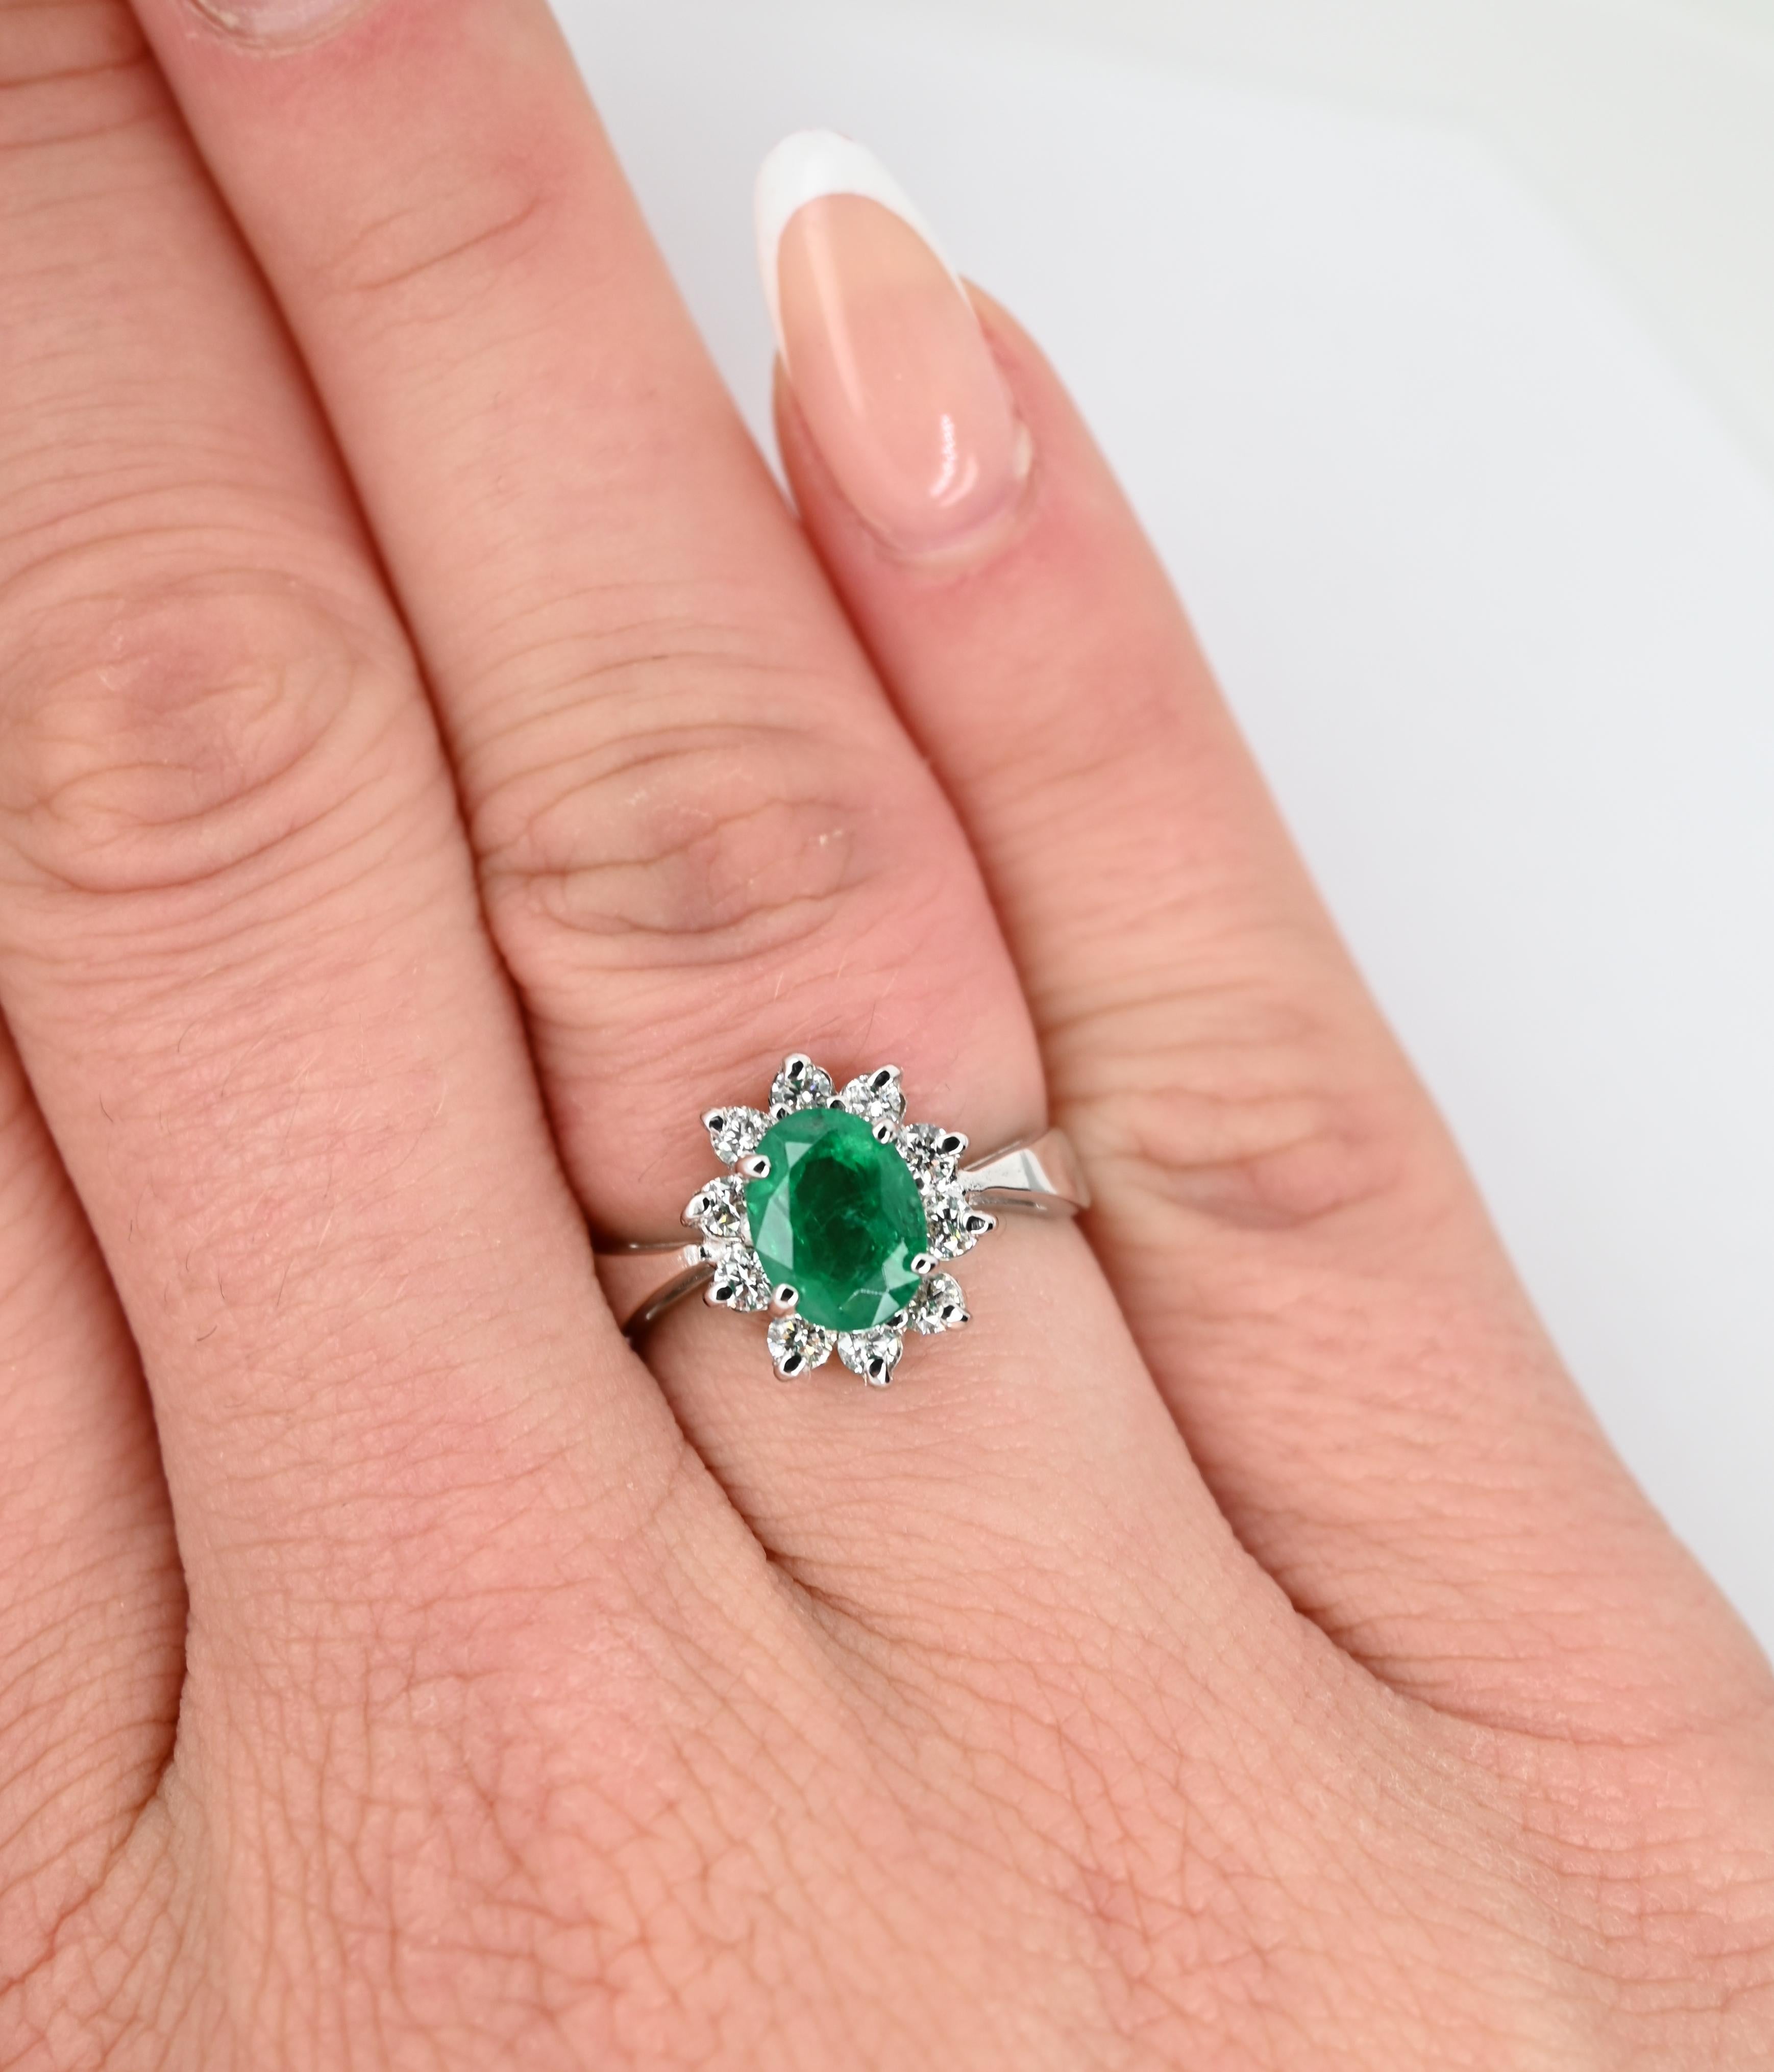 Original Magnum Creations design ring, features 0.54 carats of white diamonds and 1.10 carats of emerald as a center stone, mounted on a 14 karats white gold casting.

This ring is delicate, feminine and classic, resembles a flower shape and